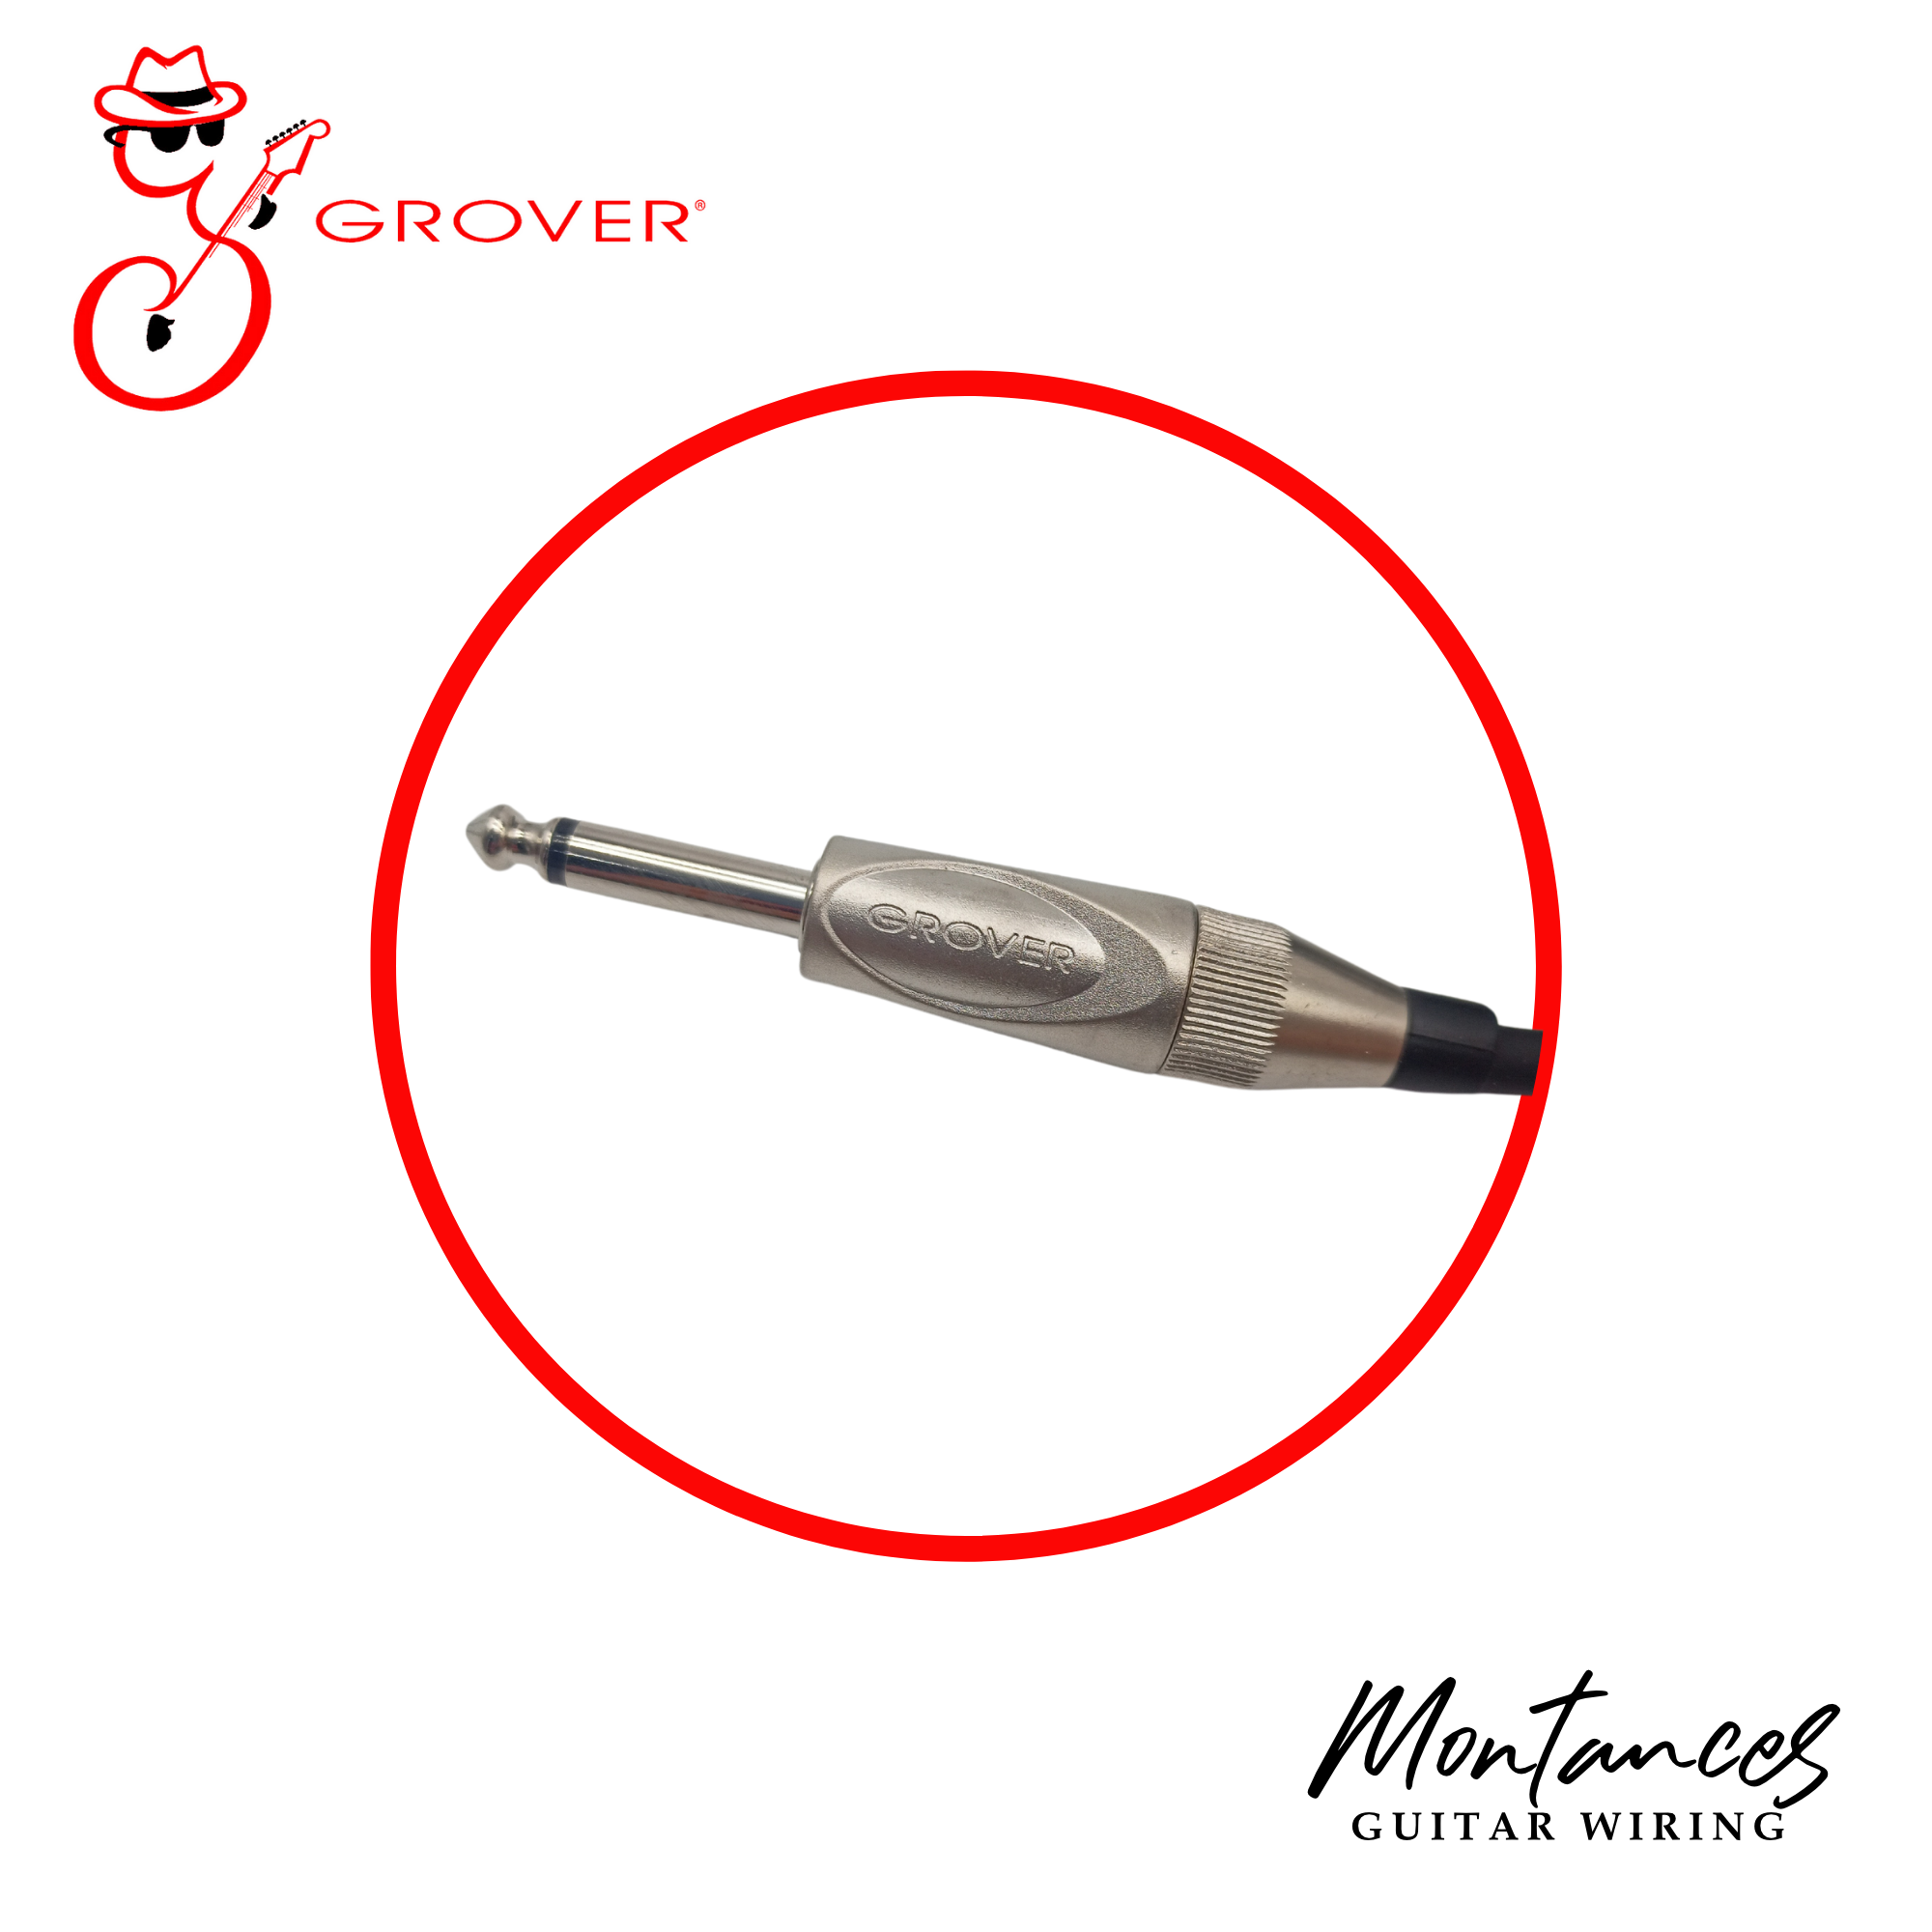 Grover Black Noiseless Instrument Cable